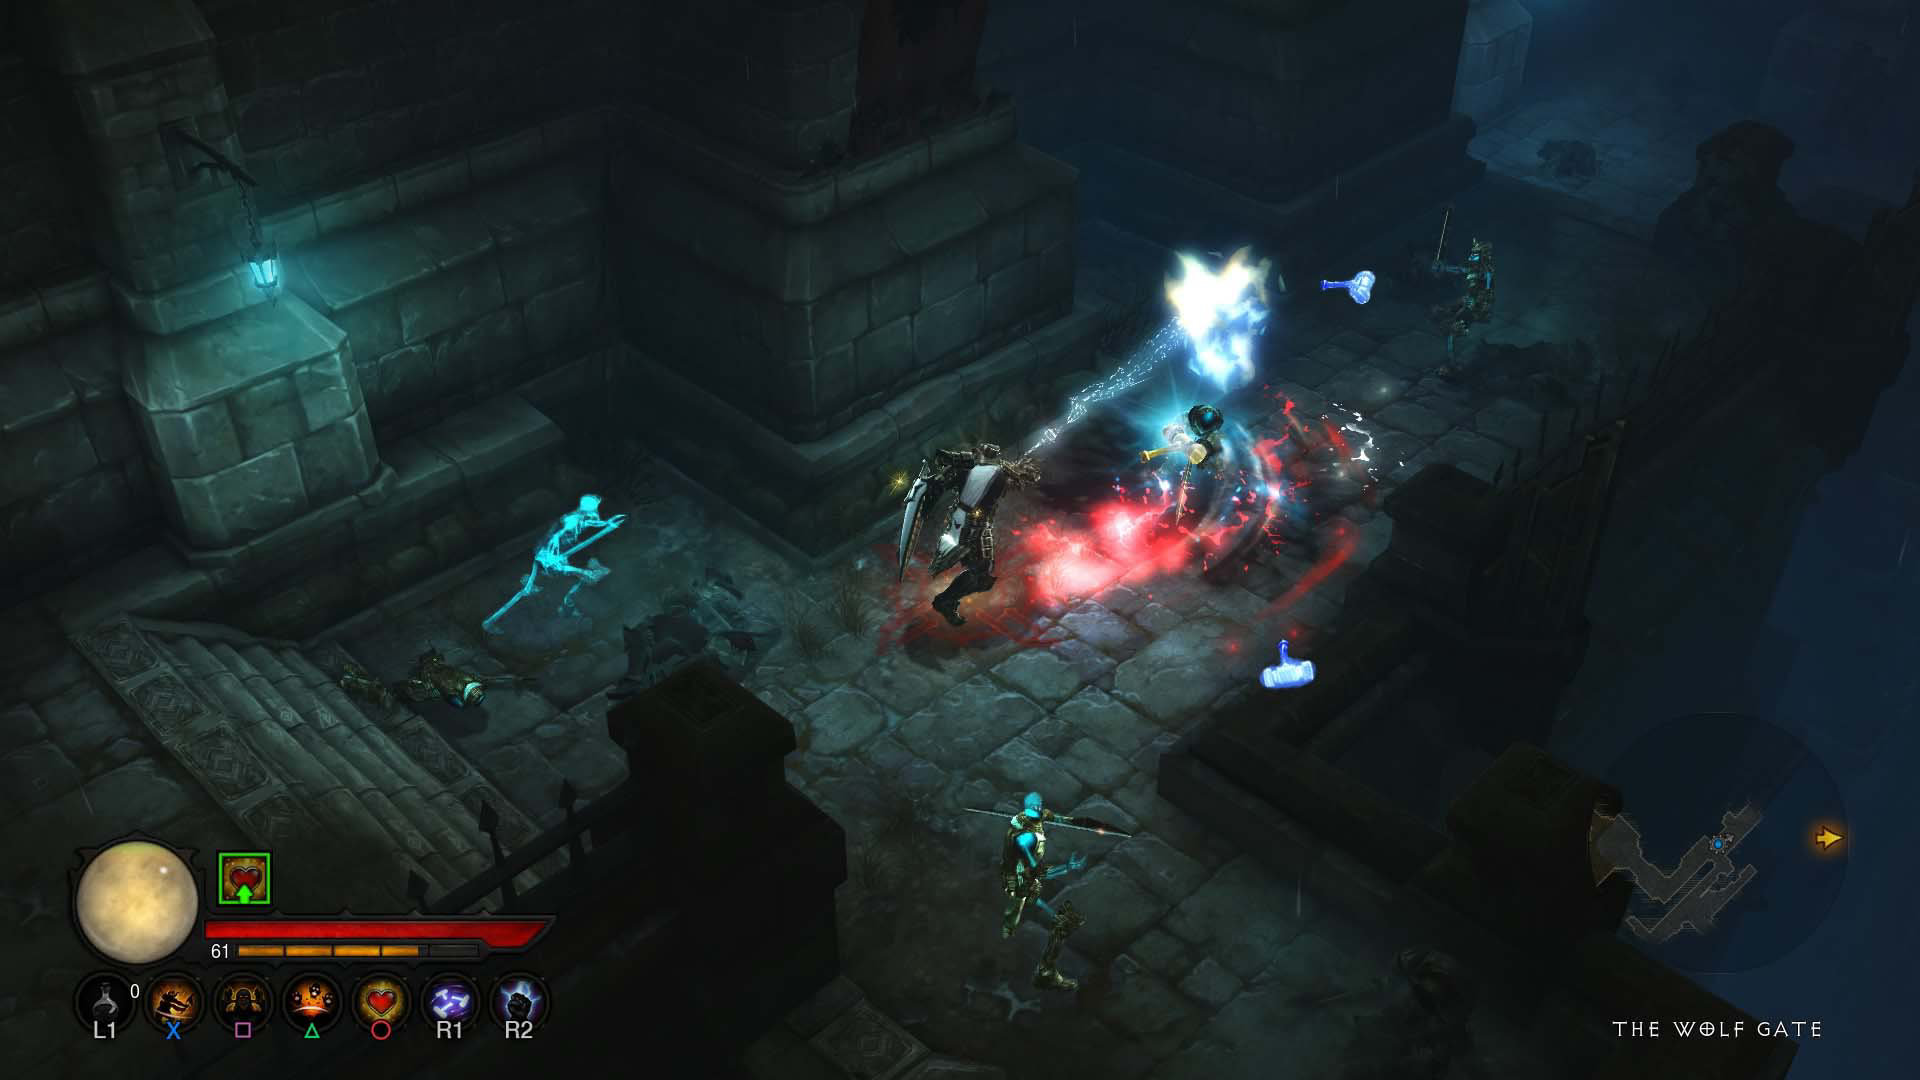 A group of characters fighting in a dark dungeon